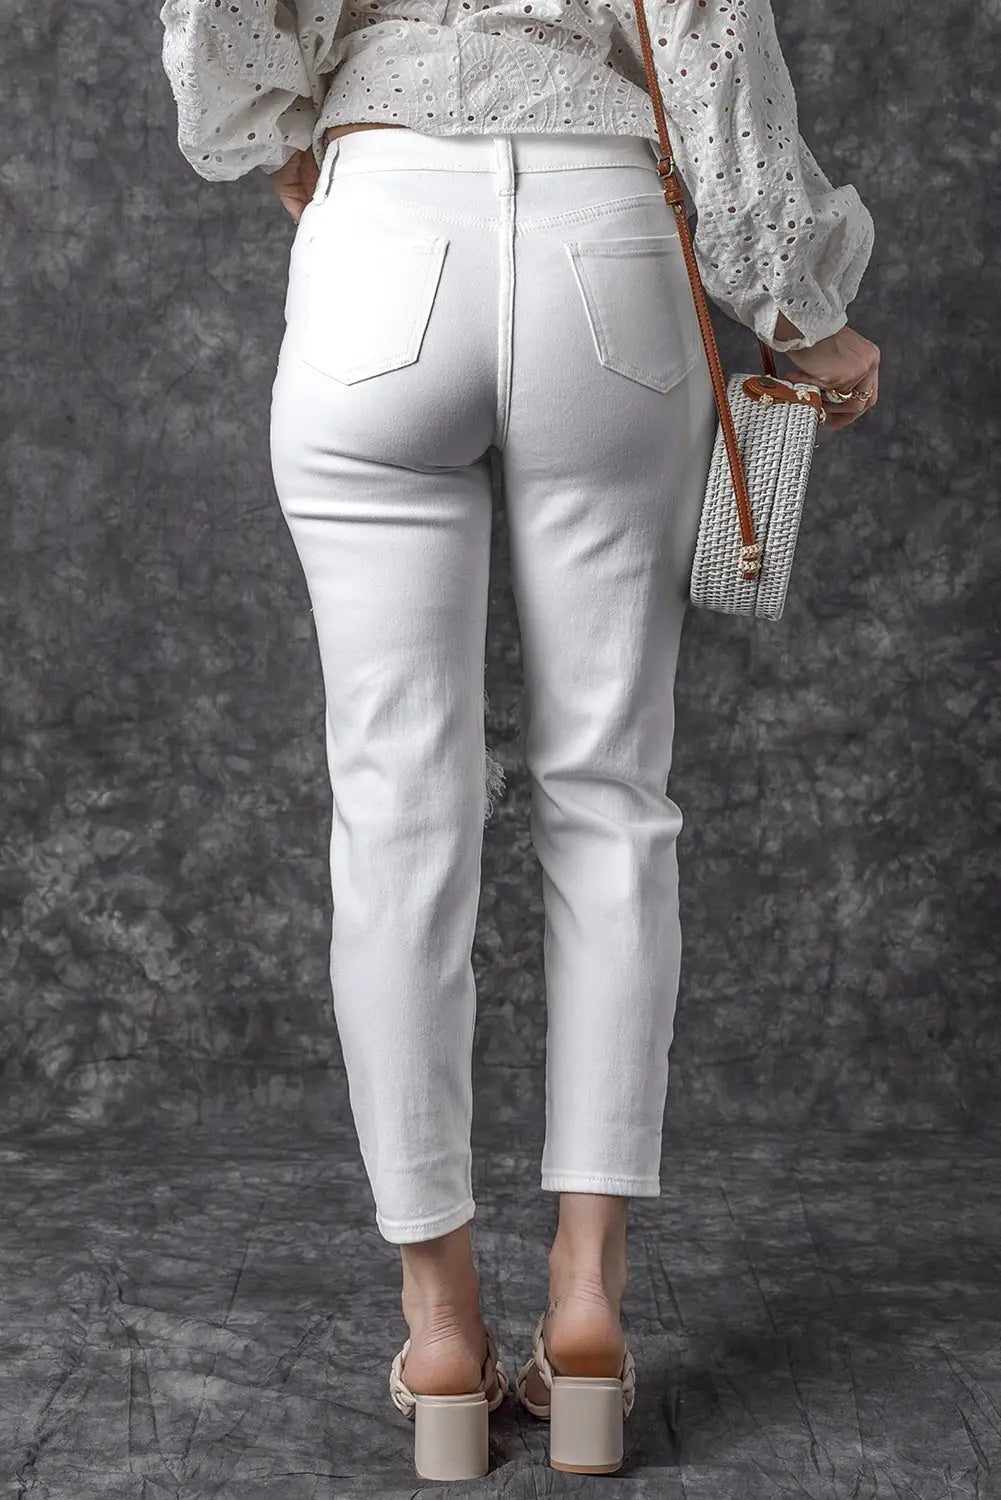 White distressed ripped holes high waist skinny jeans - bottoms